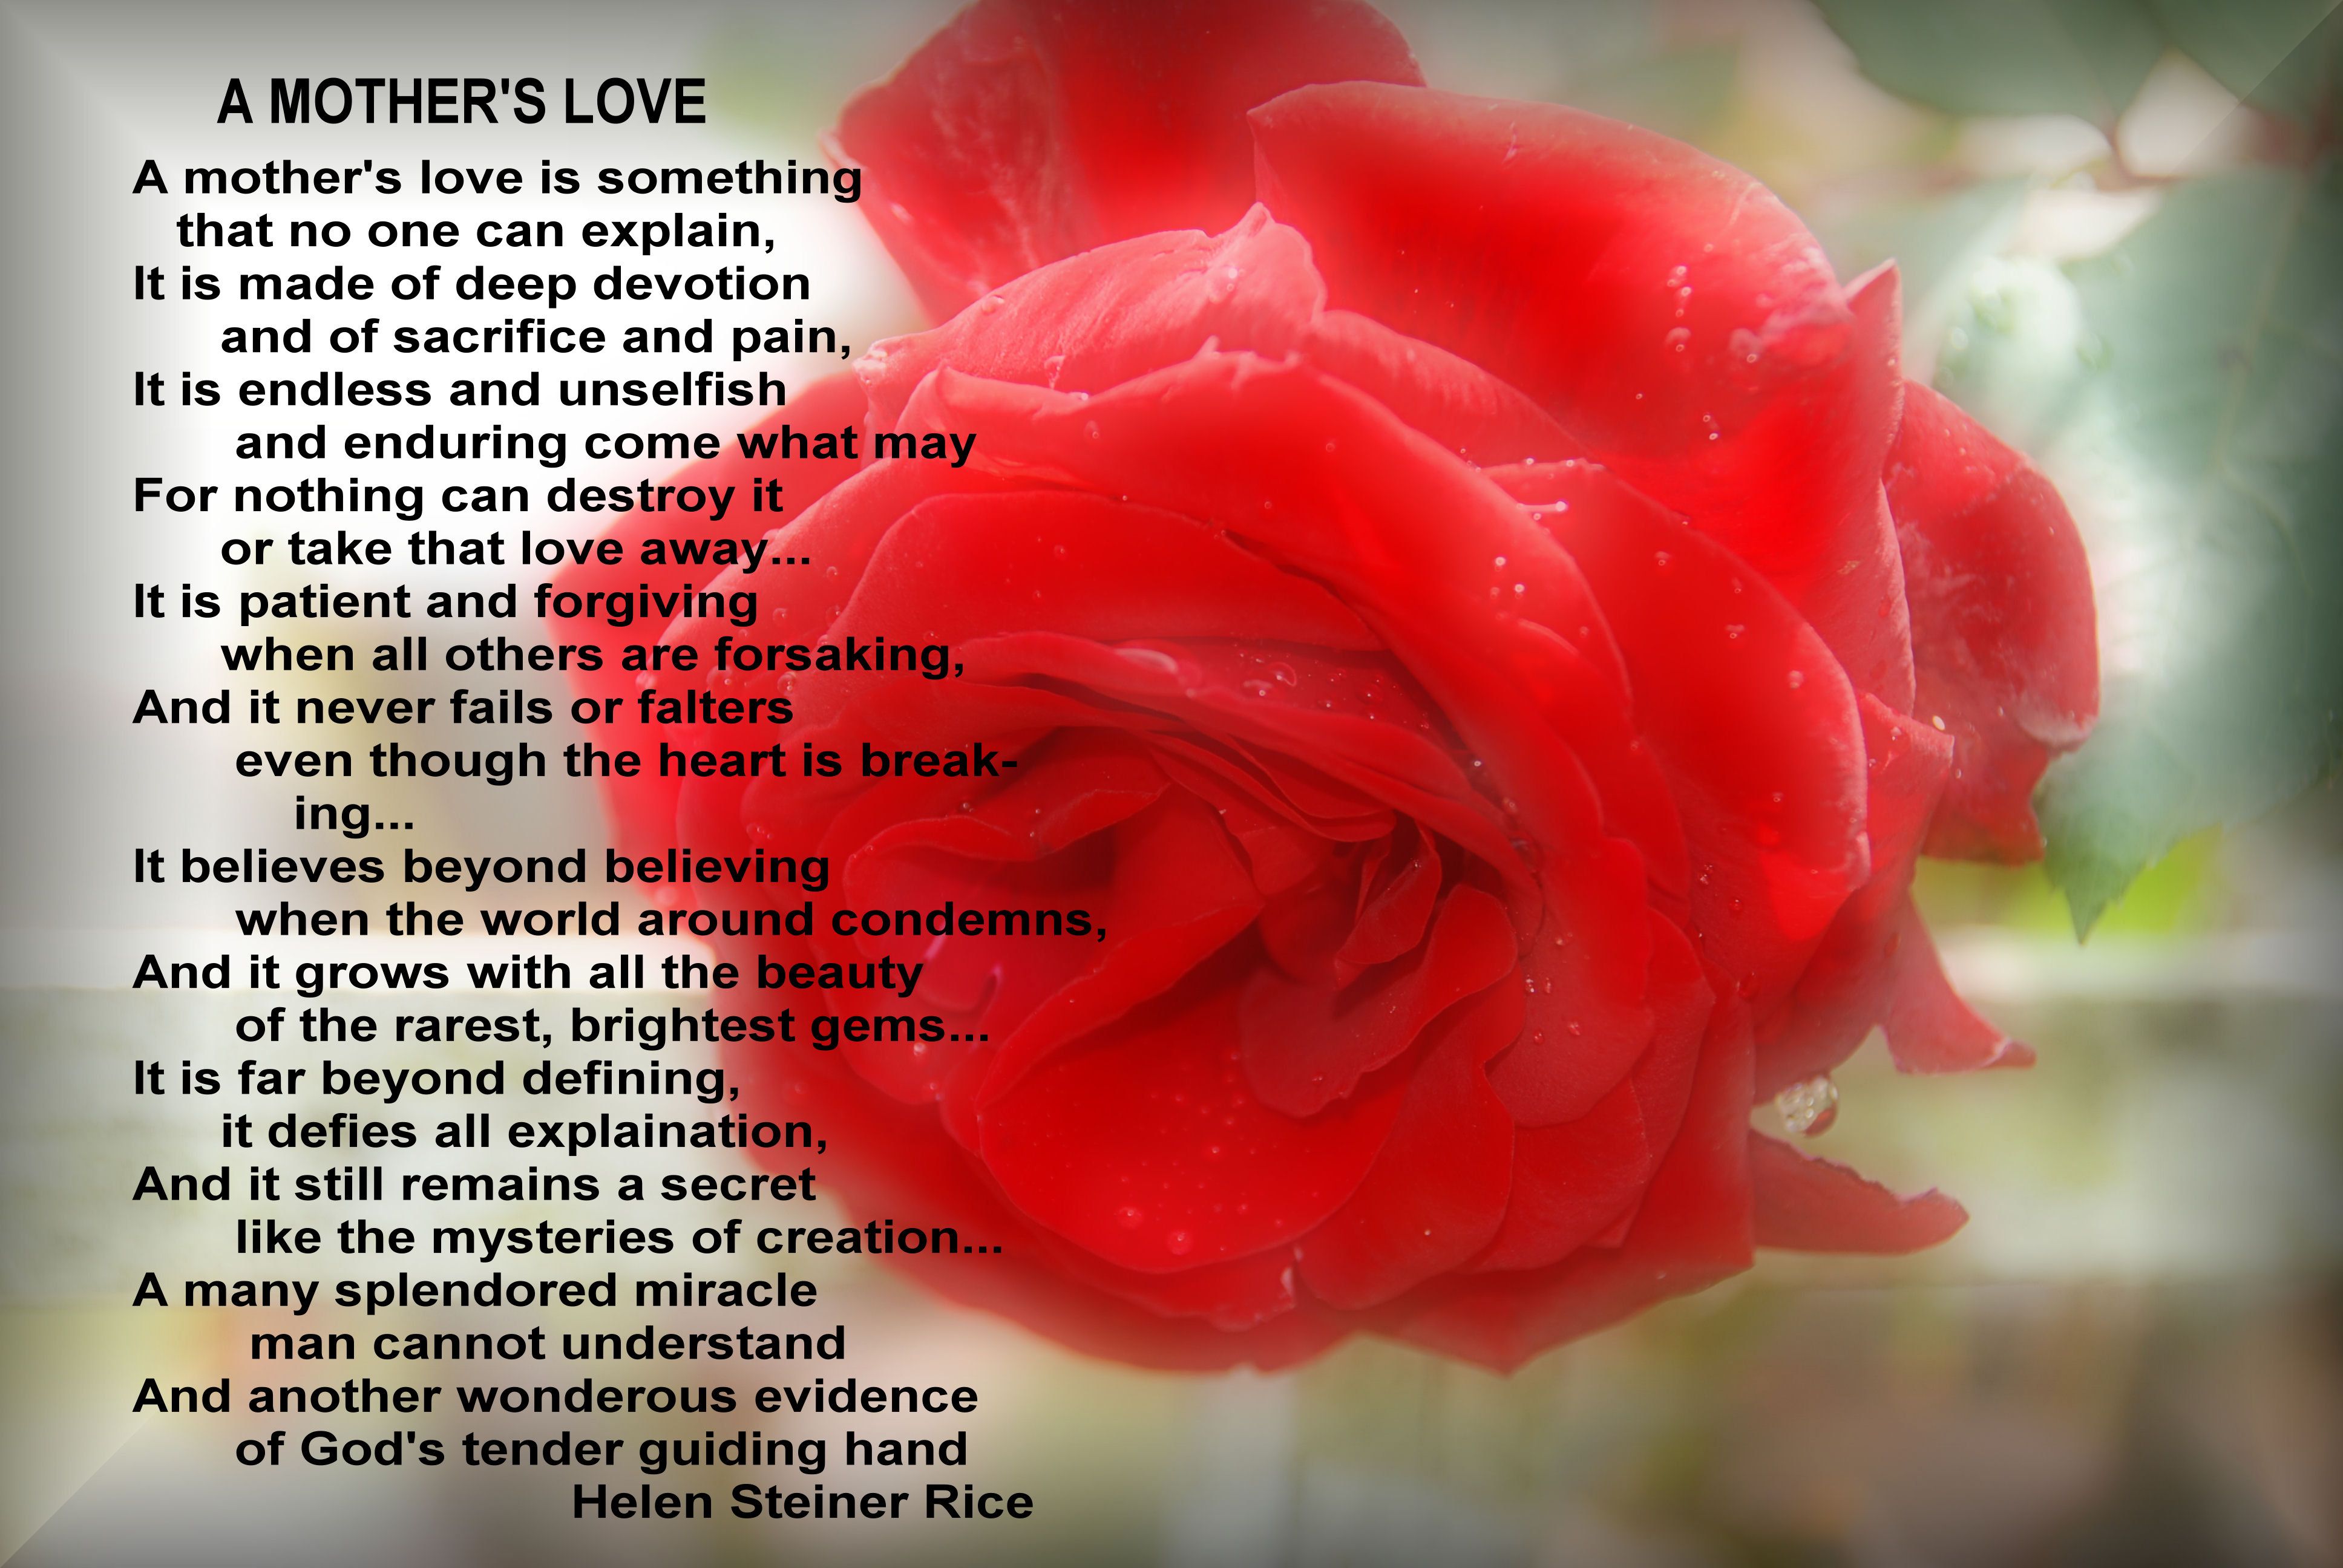 HAPPY MOTHER'S DAY! Poem, 'A MOTHER'S LOVE' by Helen Steiner Rice ...